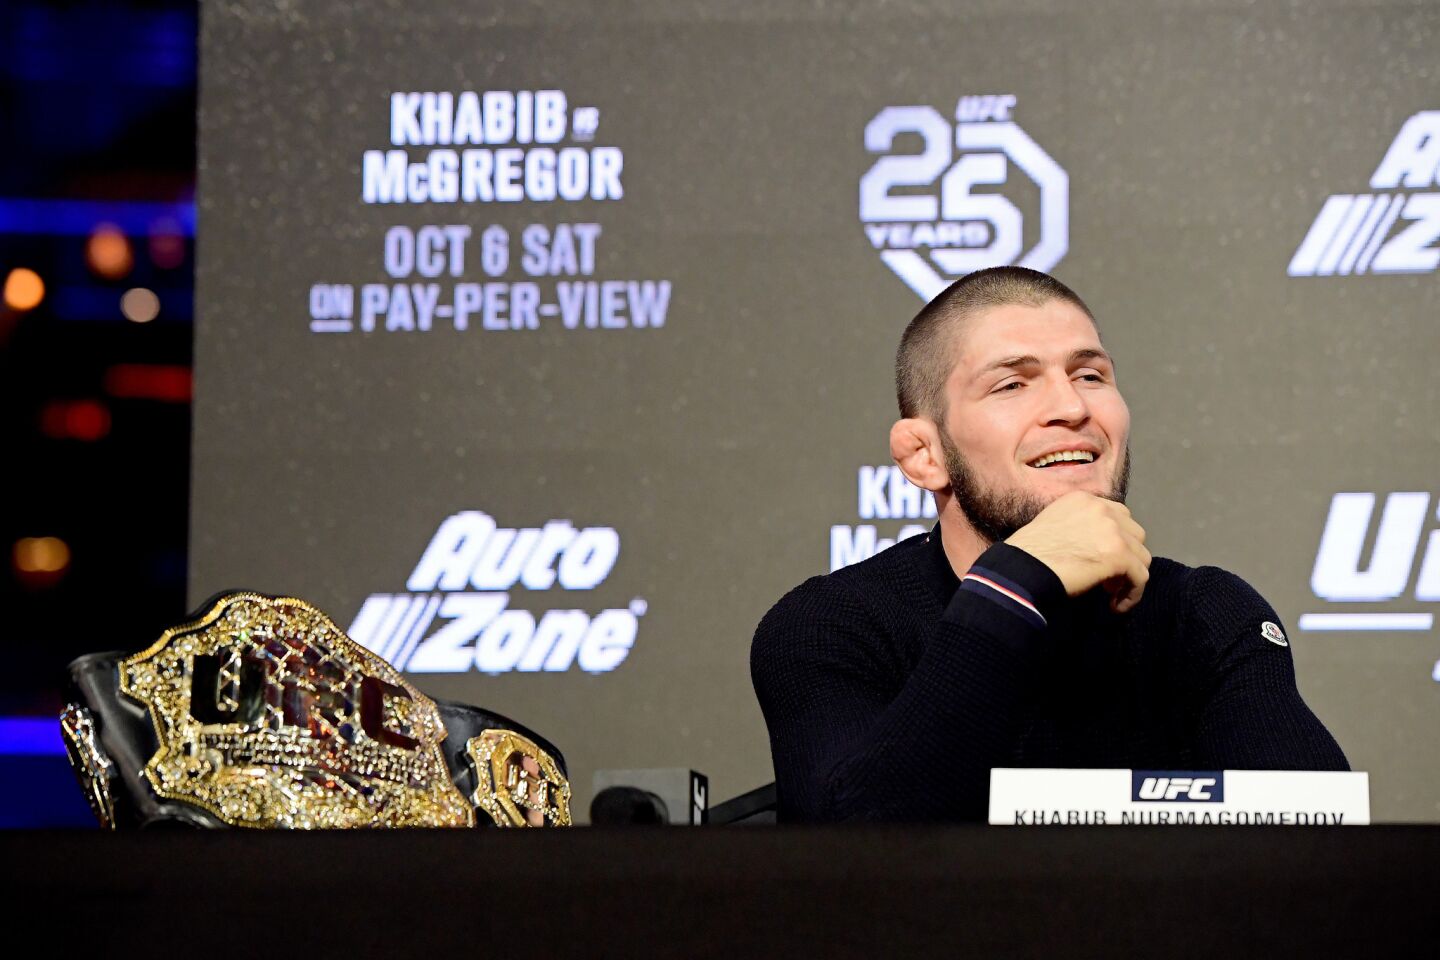 NEW YORK, NY - SEPTEMBER 20: Lightweight Champion Khabib Nurmagomedov reacts during the UFC 229 Press Conference at Radio City Music Hall on September 20, 2018 in New York City. (Photo by Steven Ryan/Getty Images) ** OUTS - ELSENT, FPG, CM - OUTS * NM, PH, VA if sourced by CT, LA or MoD **